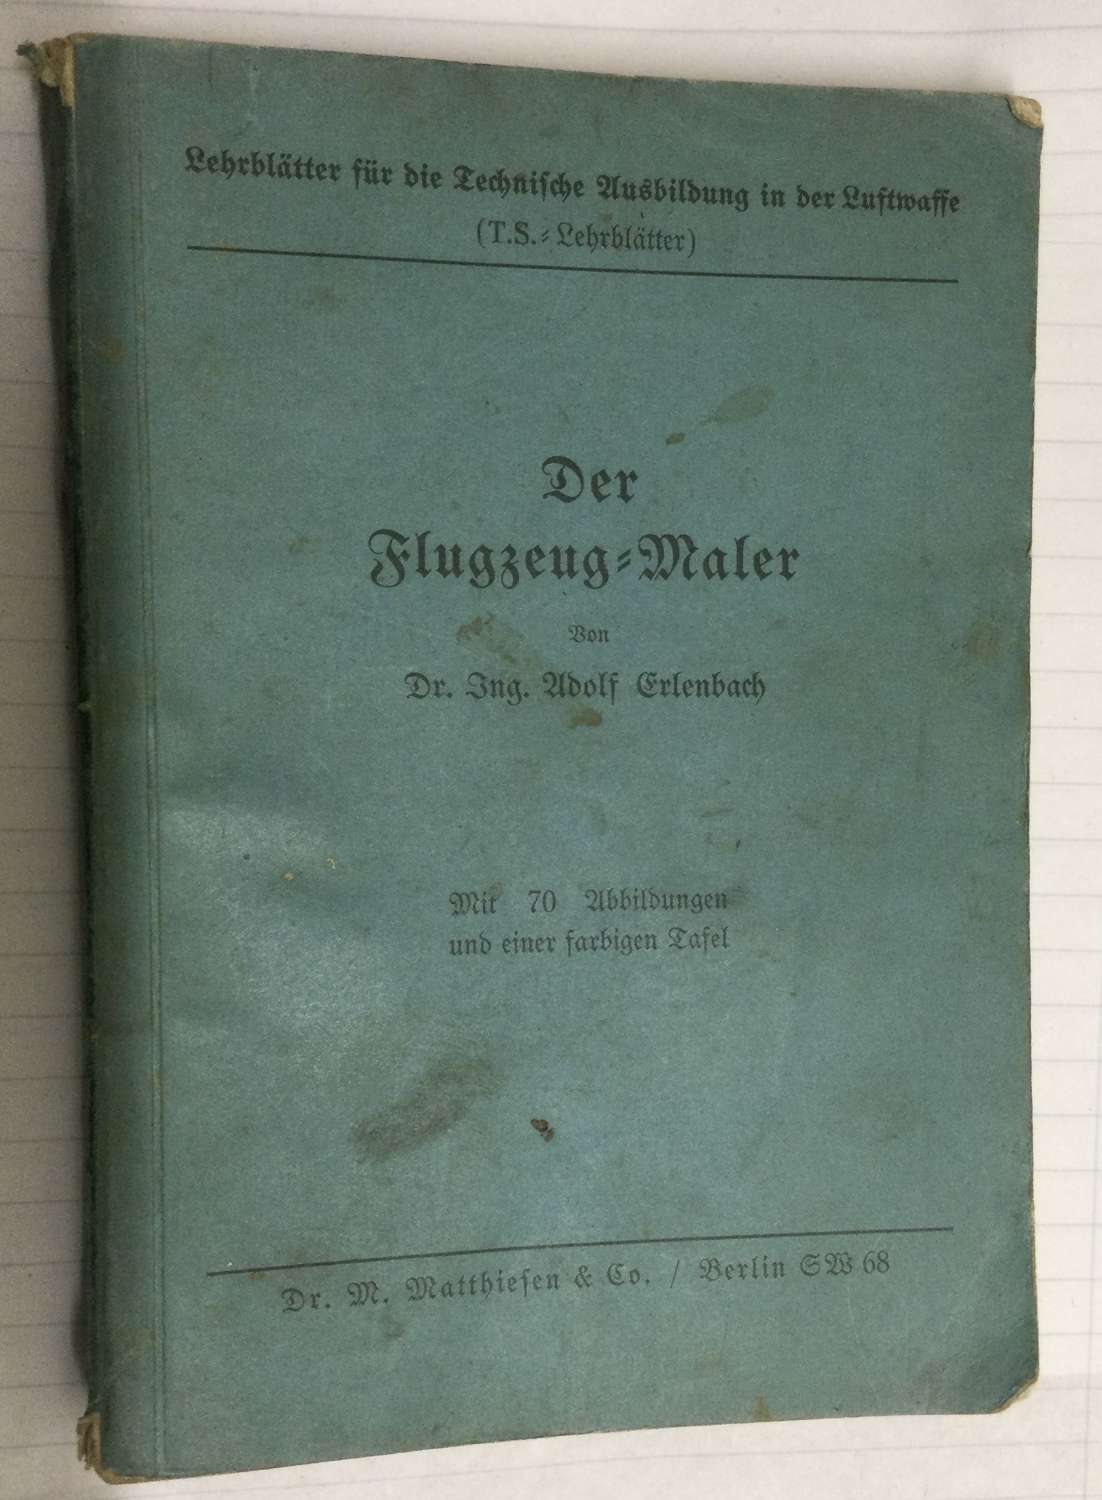 A 1939 DATED GERMAN BOOK ON AIRCRAFT PAINTING